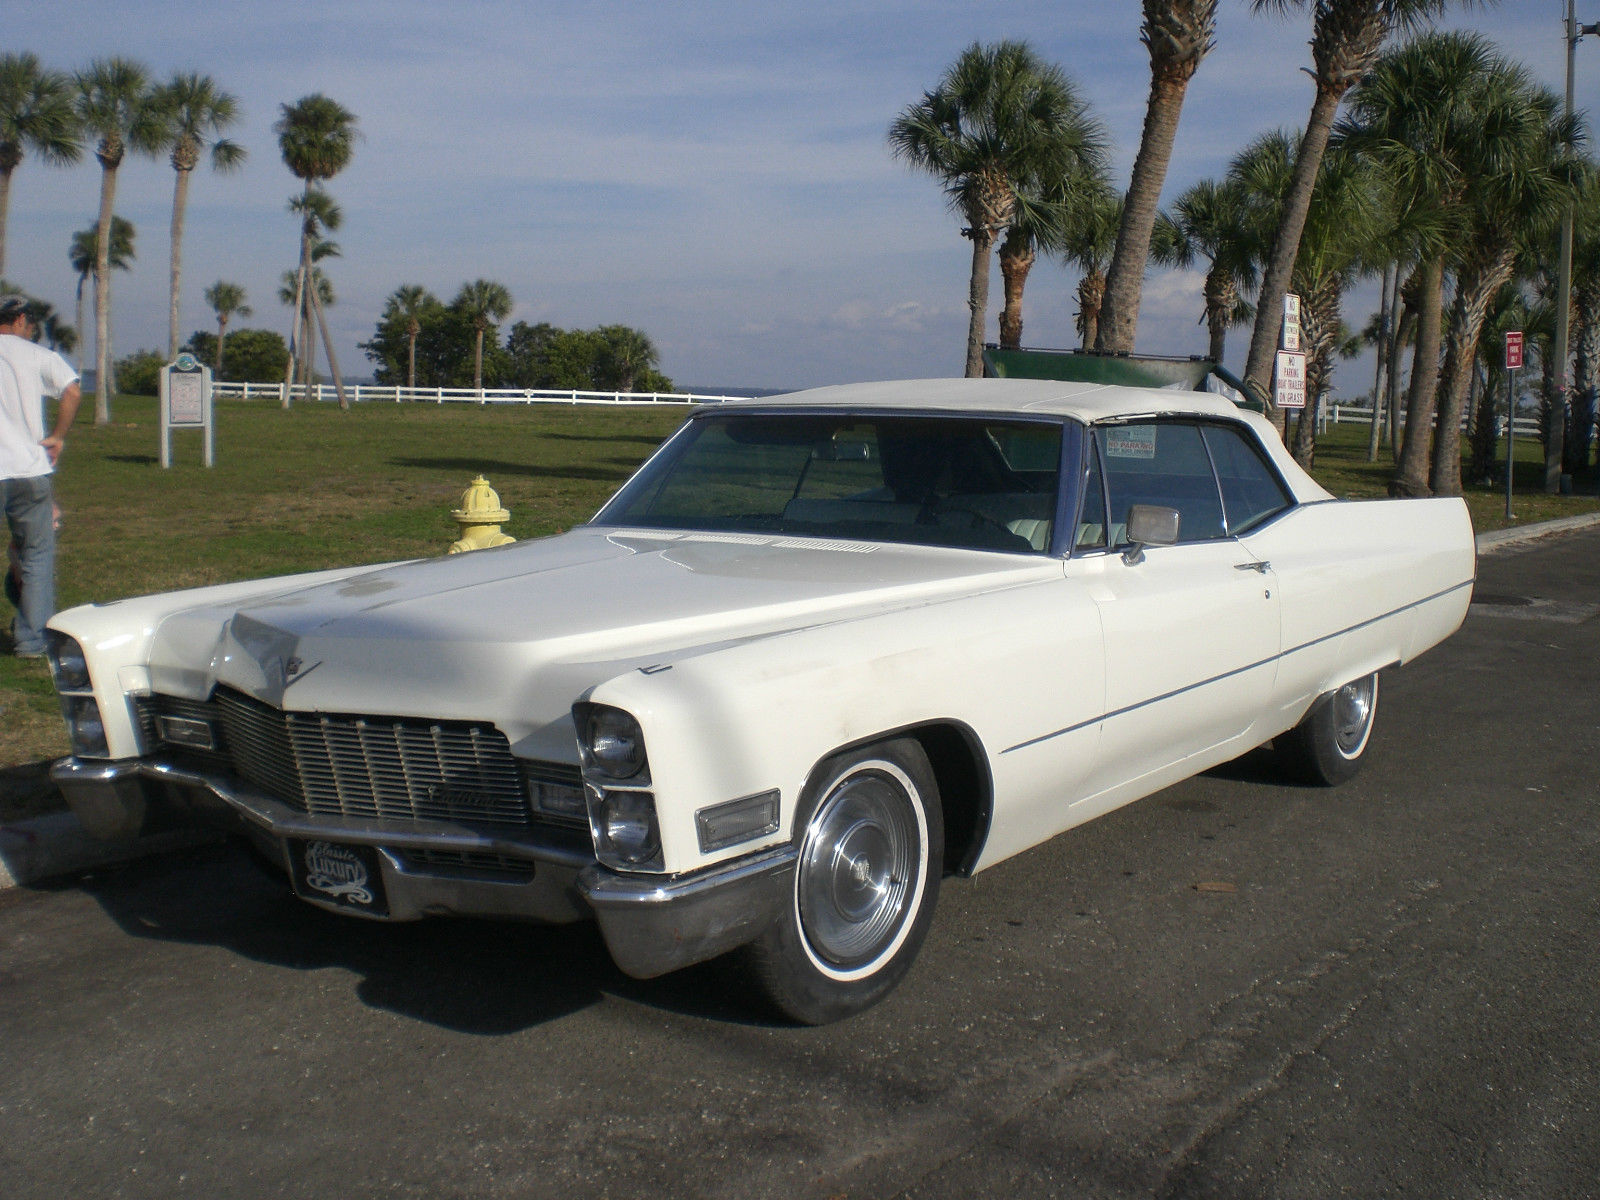 1968 Cadillac DeVille for sale in Clearwater, Florida, United States.